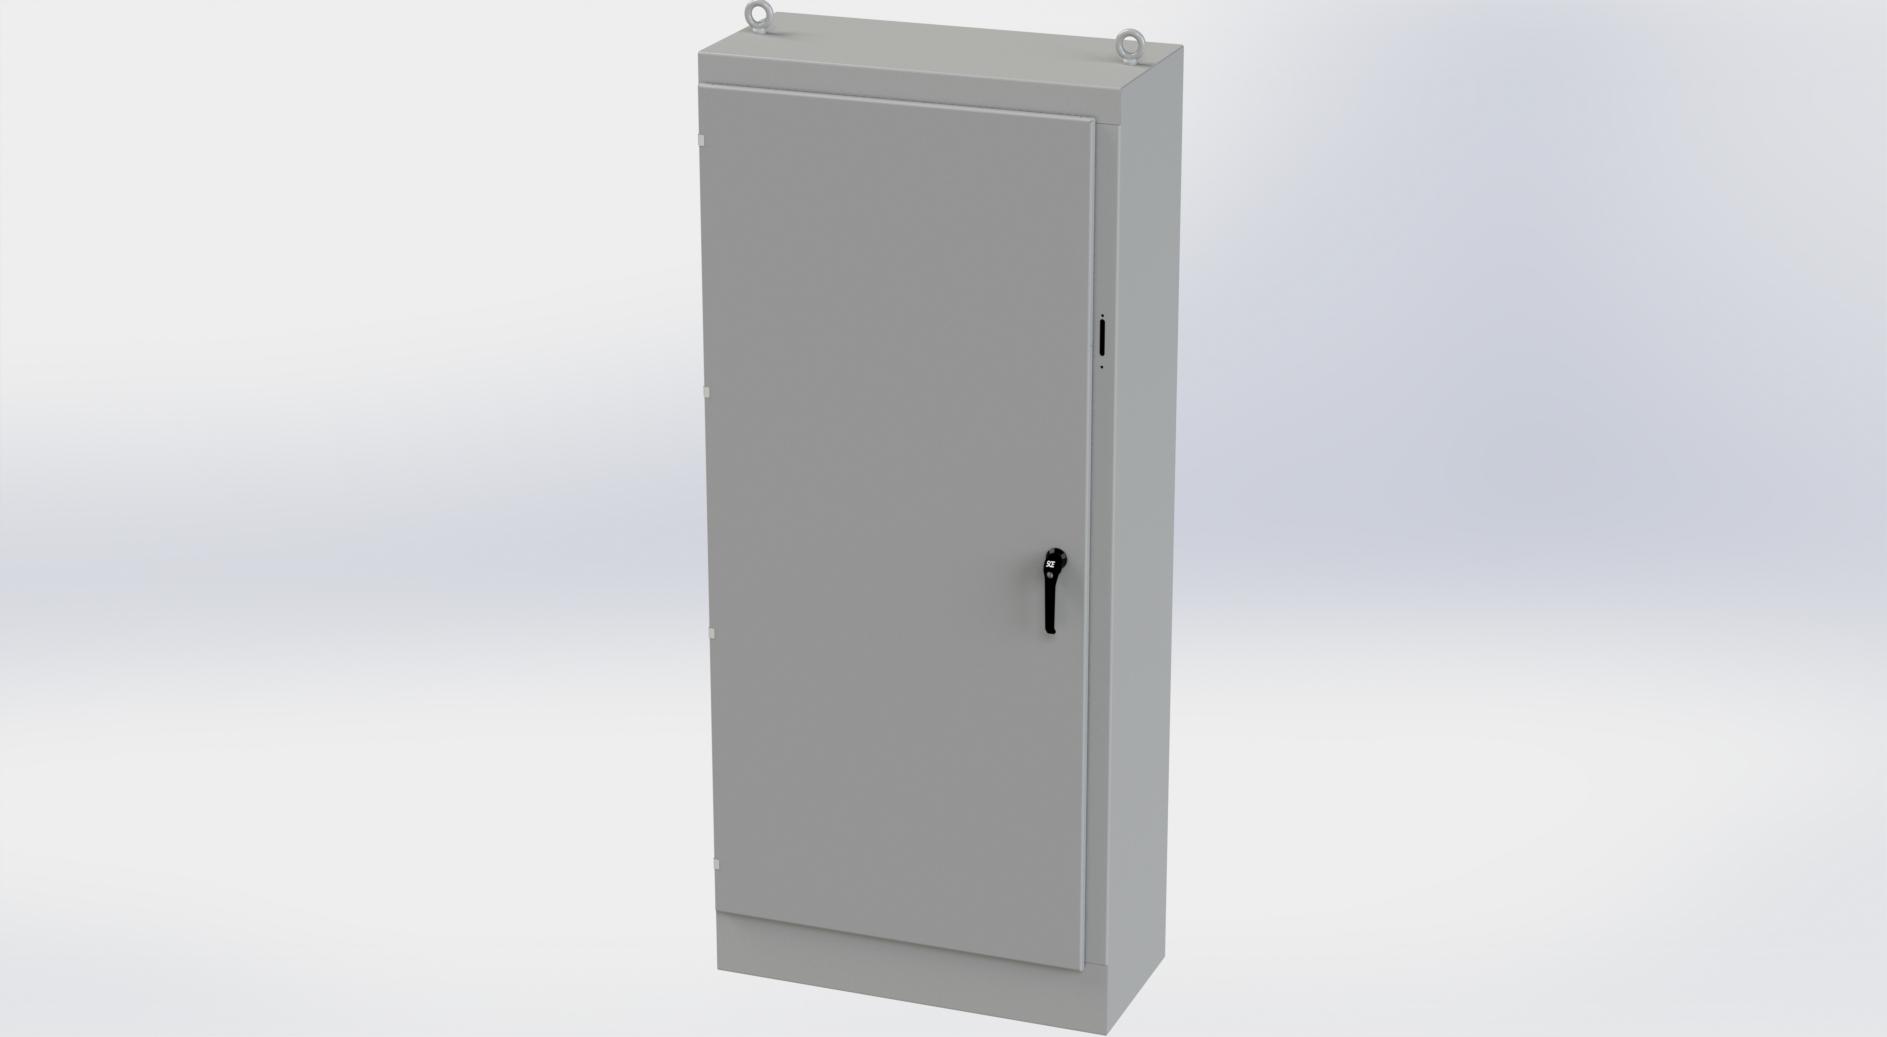 Saginaw Control SCE-90XM4018 1DR XM Enclosure, Height:90.00", Width:39.50", Depth:18.00", ANSI-61 gray powder coating inside and out. Sub-panels are powder coated white.  